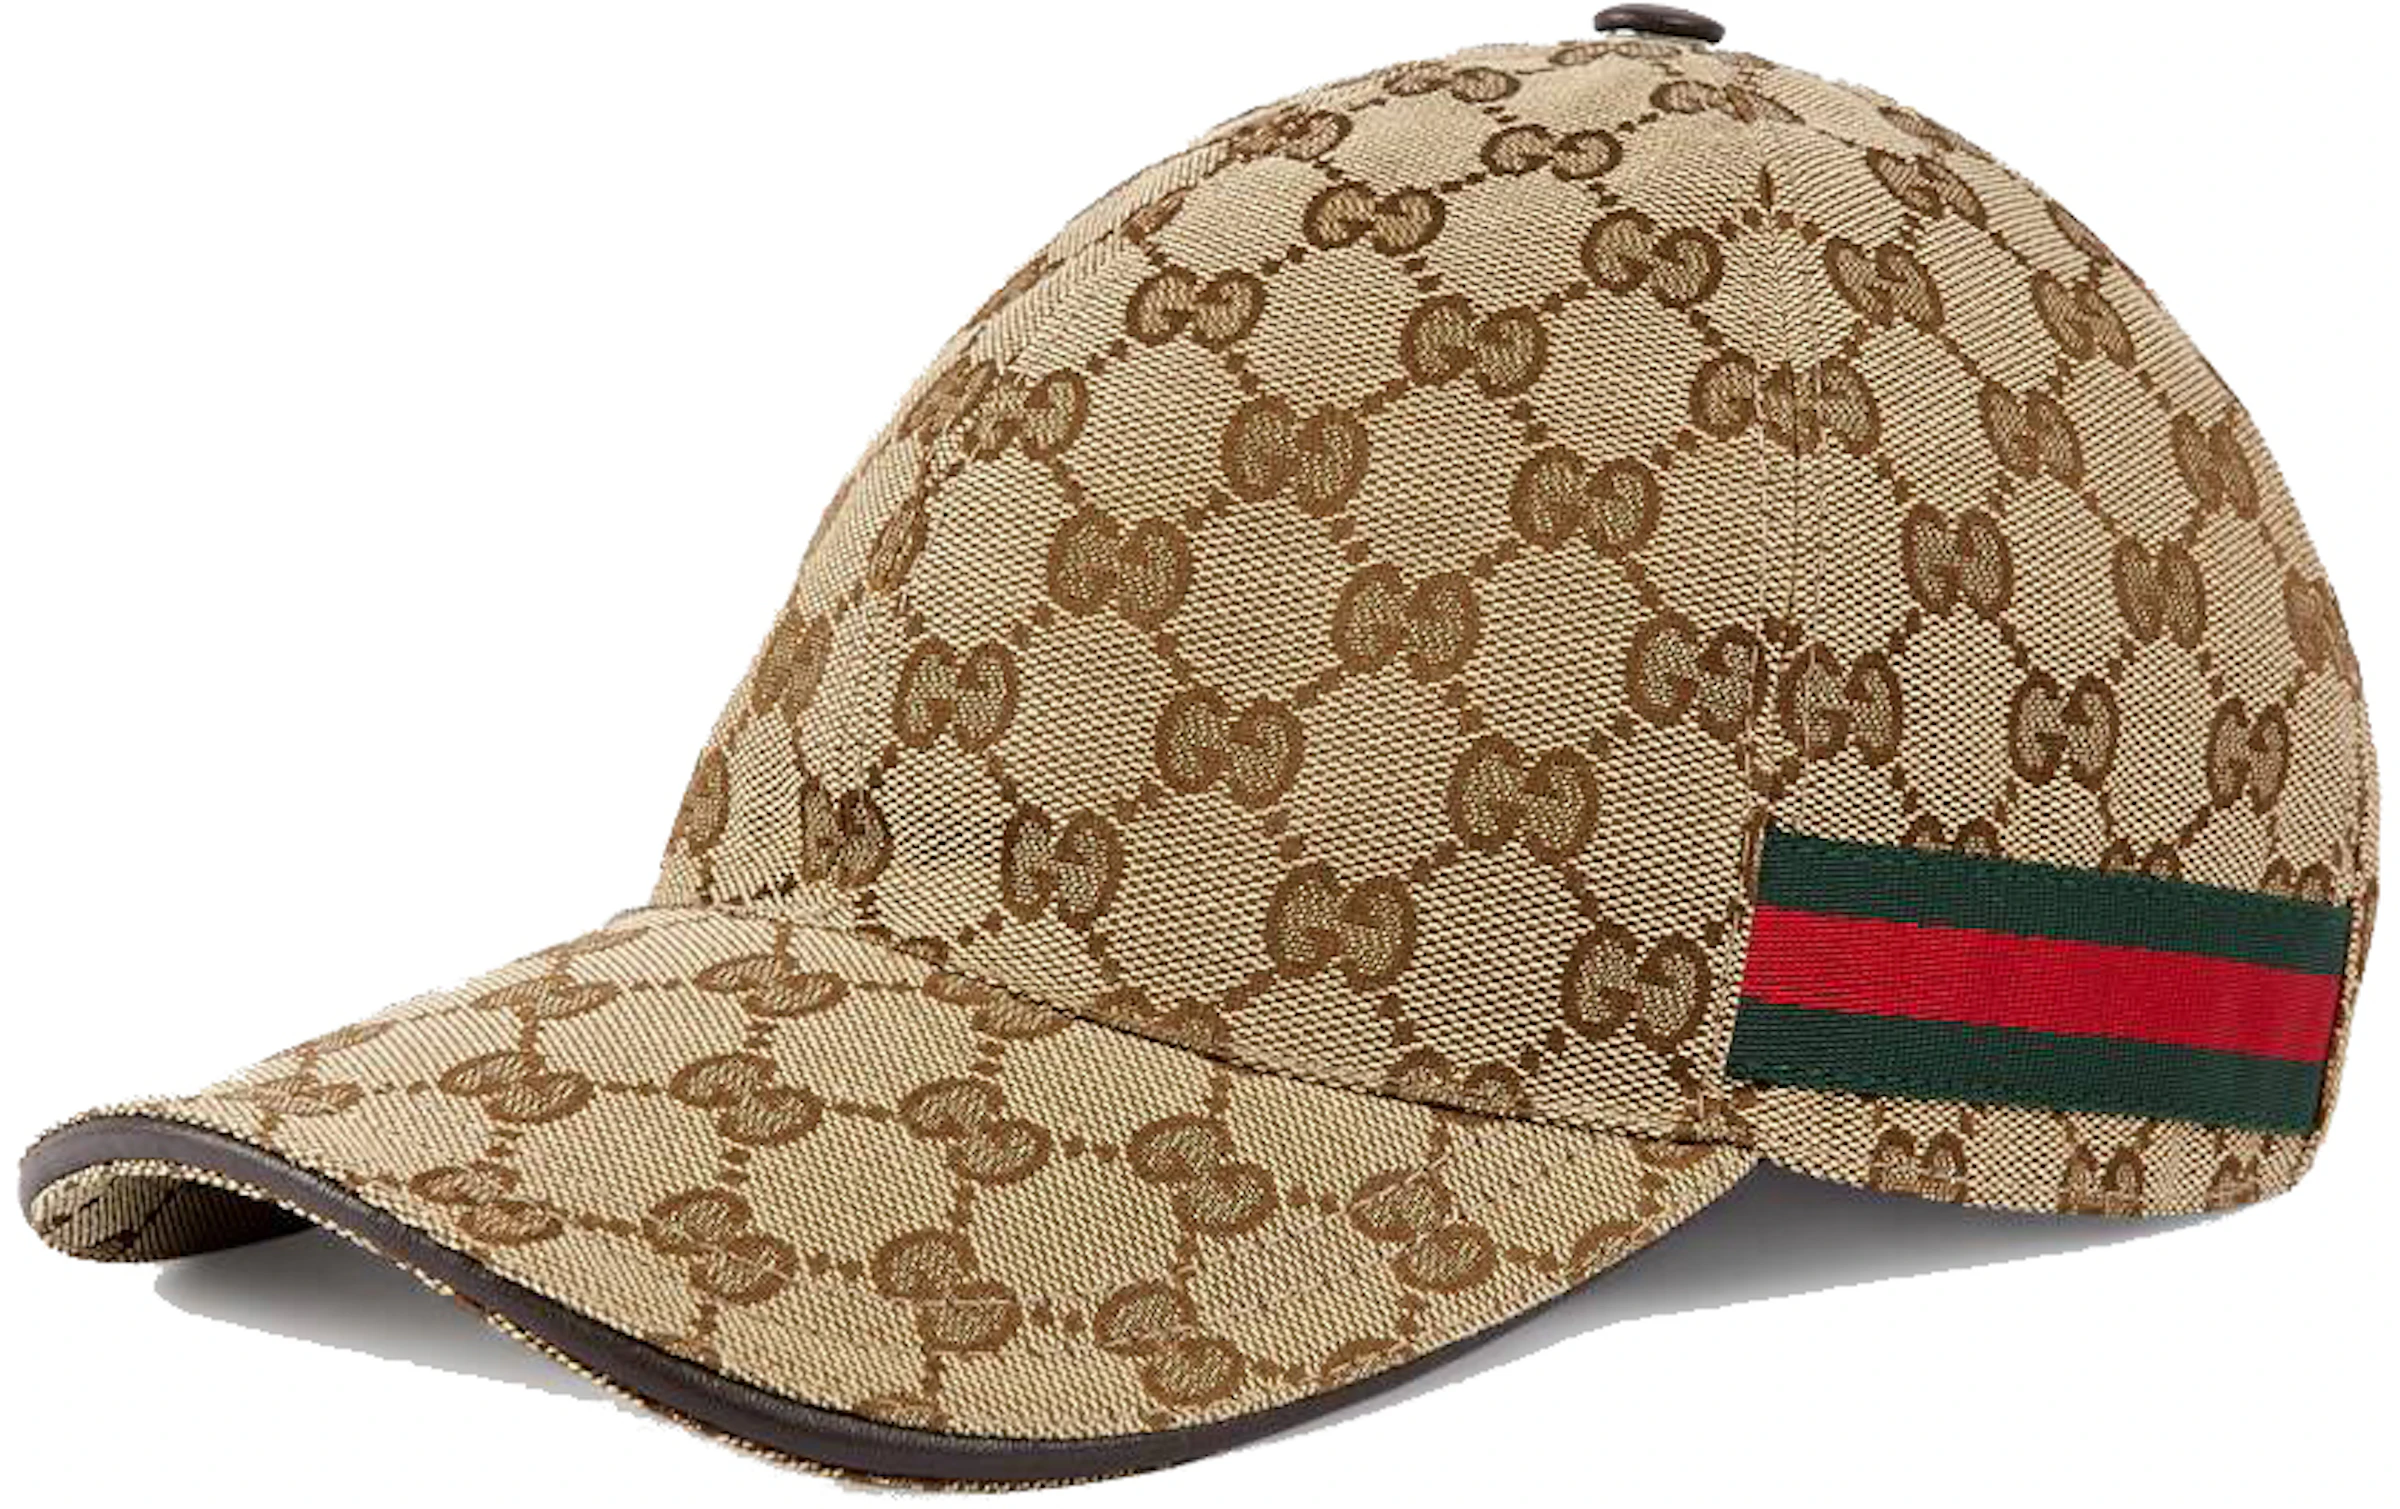 Buy Gucci Hats for Men and Women - StockX